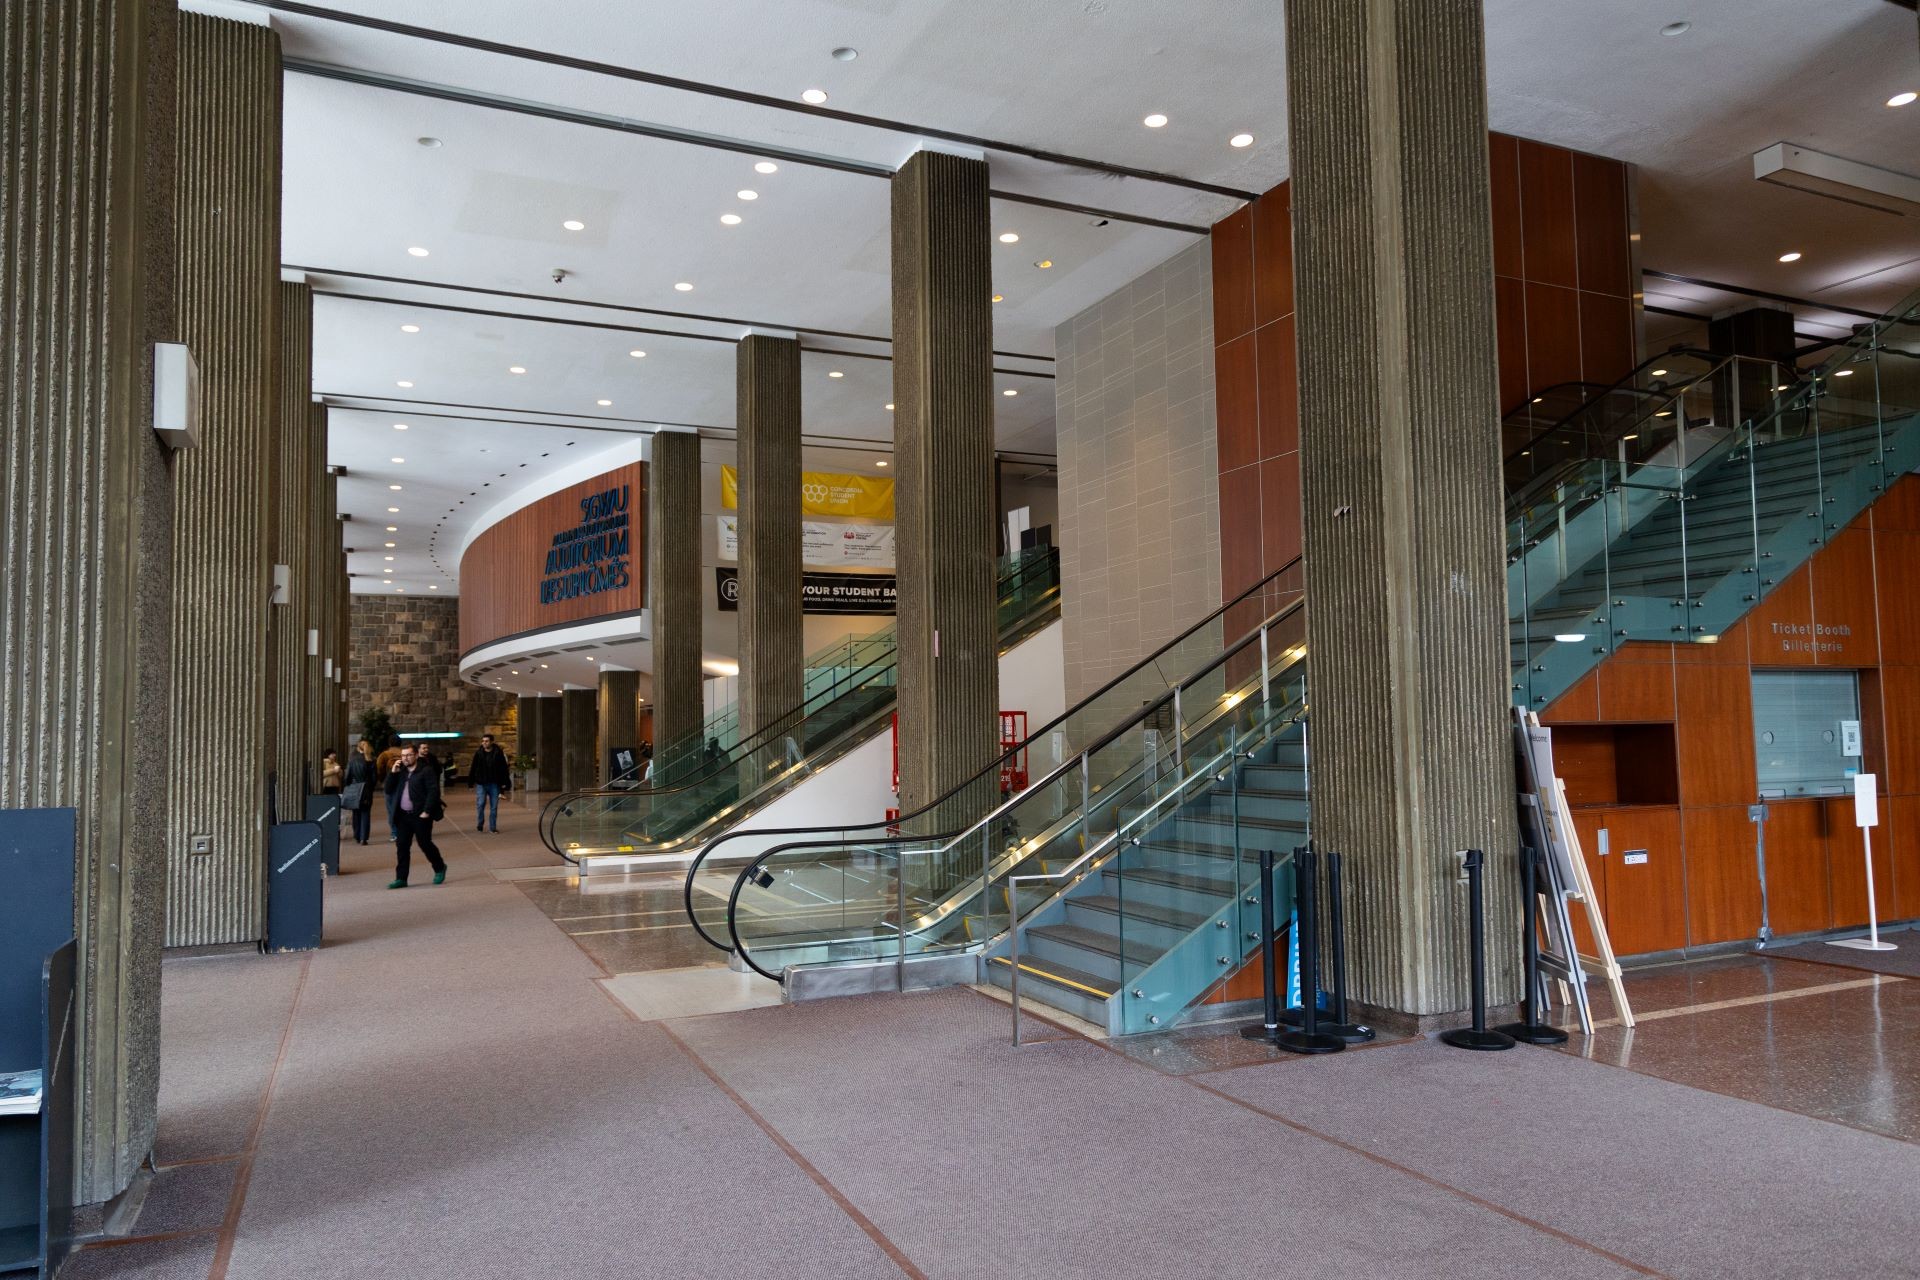 A spacious university hall with modern furnishings and architectural elements, including a staircase and large windows.